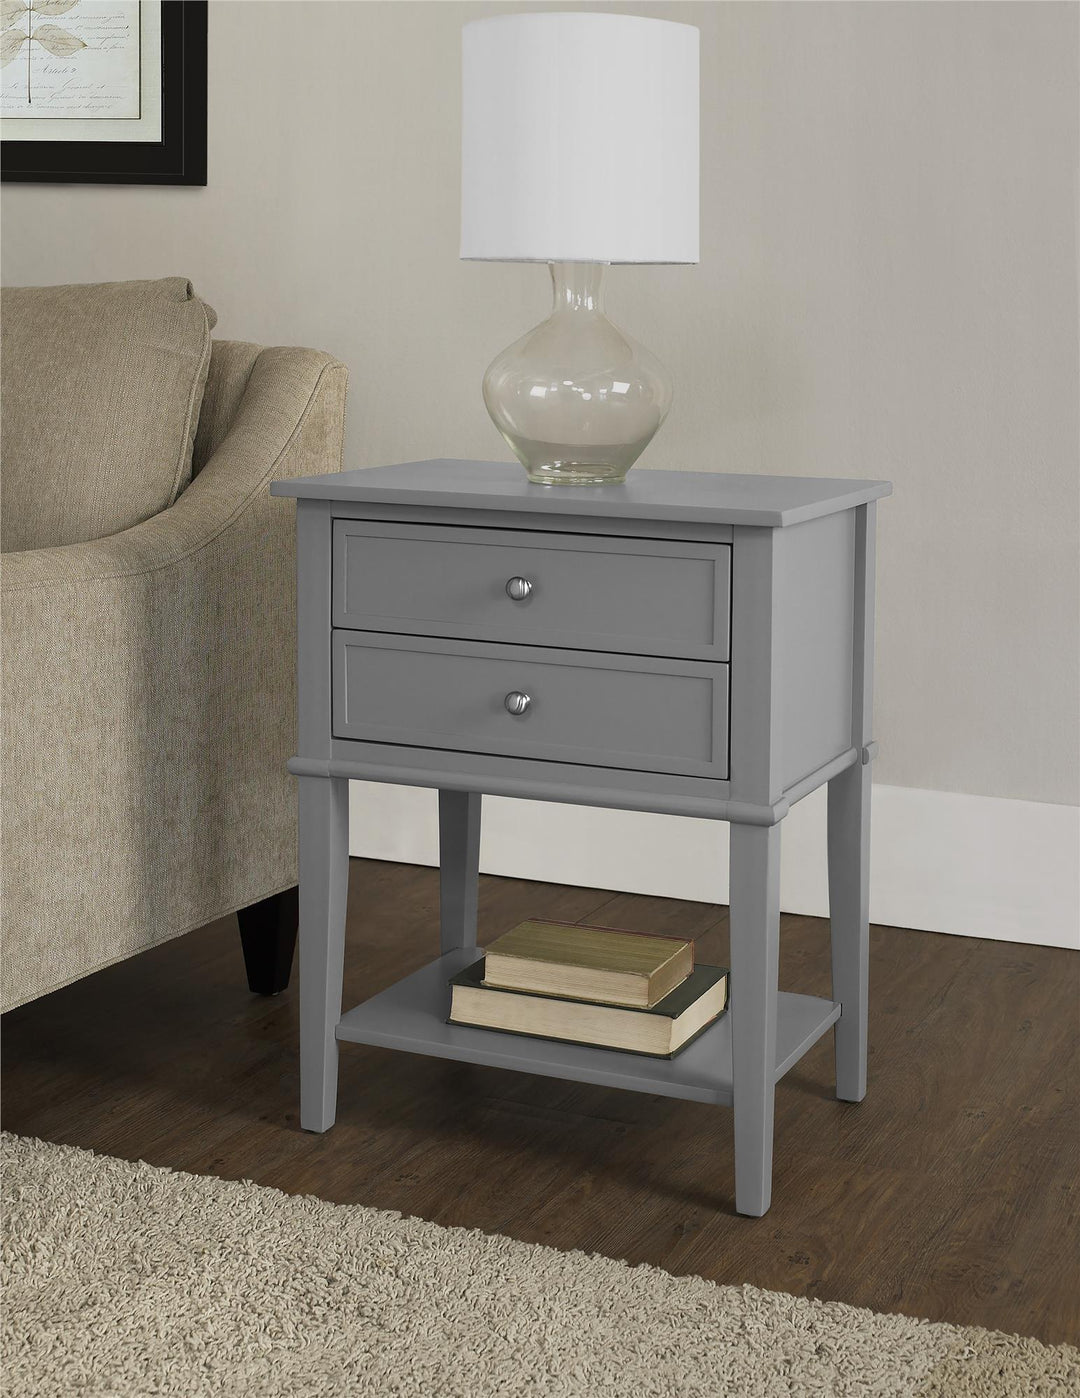 Franklin Accent Table with 2 Drawers - Gray